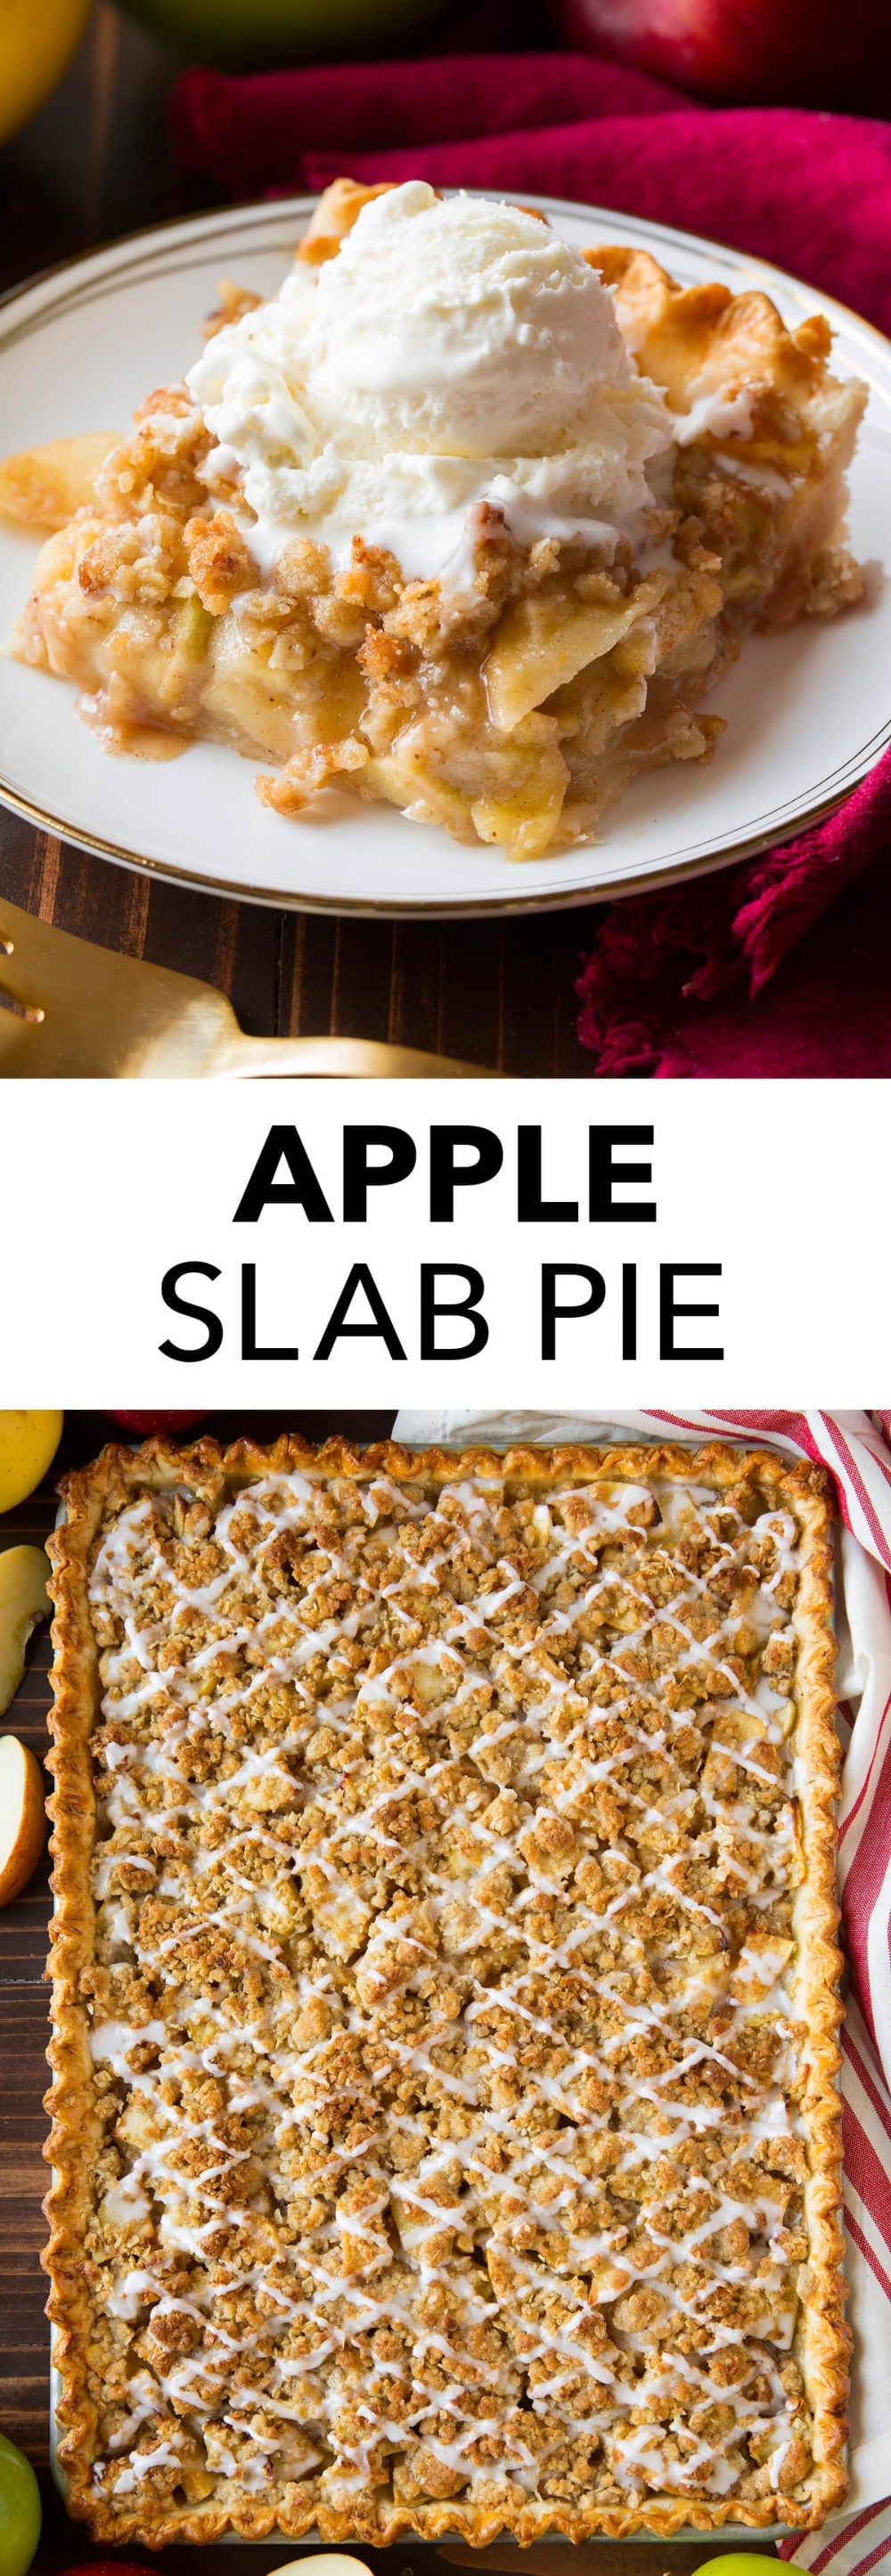 Apple Slab Pie (with Crumb Topping) - Cooking Classy -   18 thanksgiving desserts for a crowd ideas